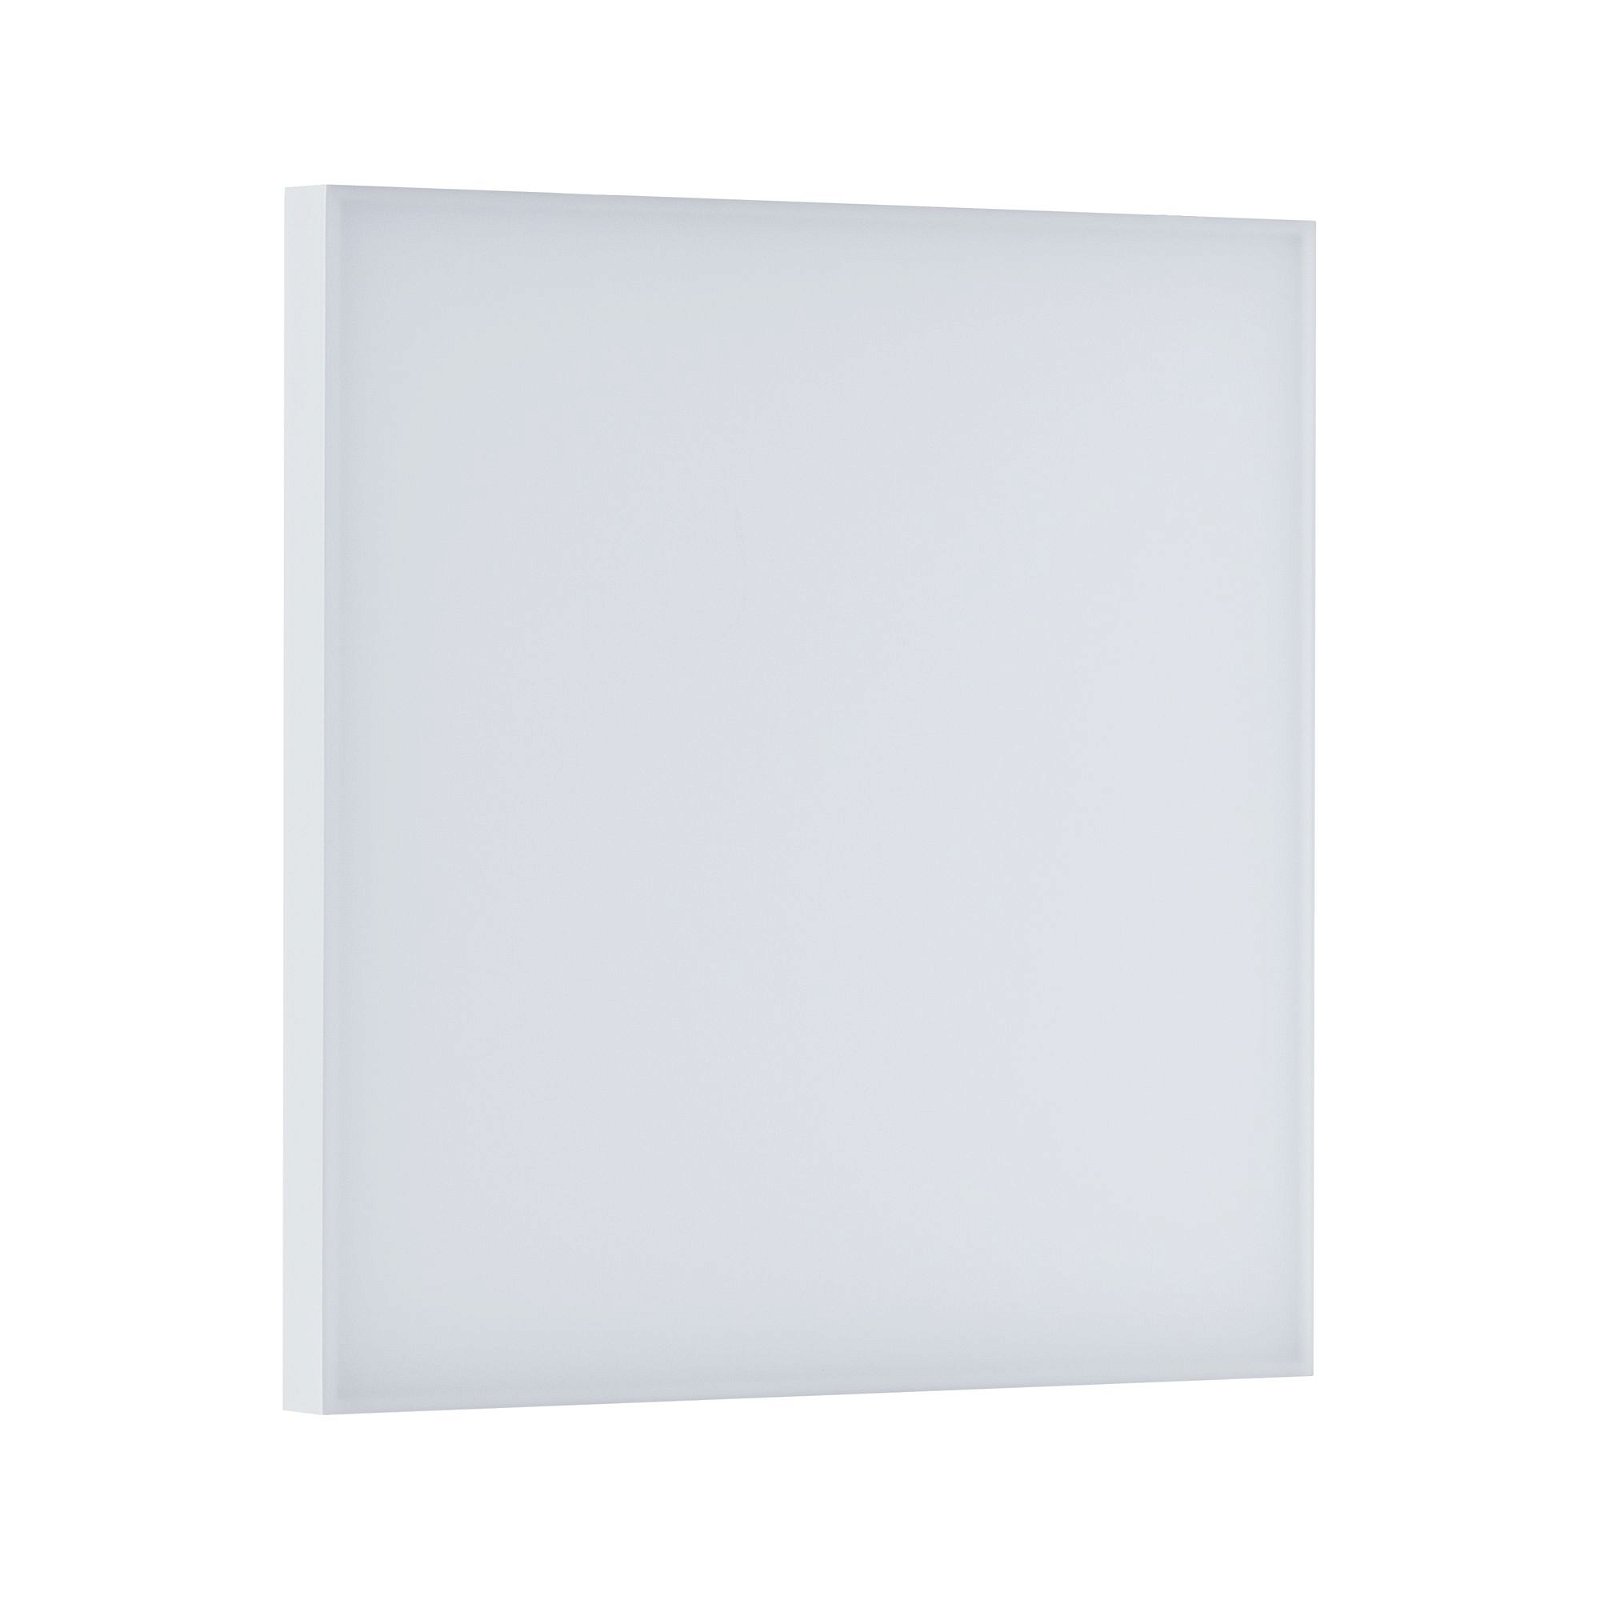 LED Panel Smart Home Zigbee 3.0 Velora square 295x295mm 10,5W 1100lm Tunable White Matt white dimmable